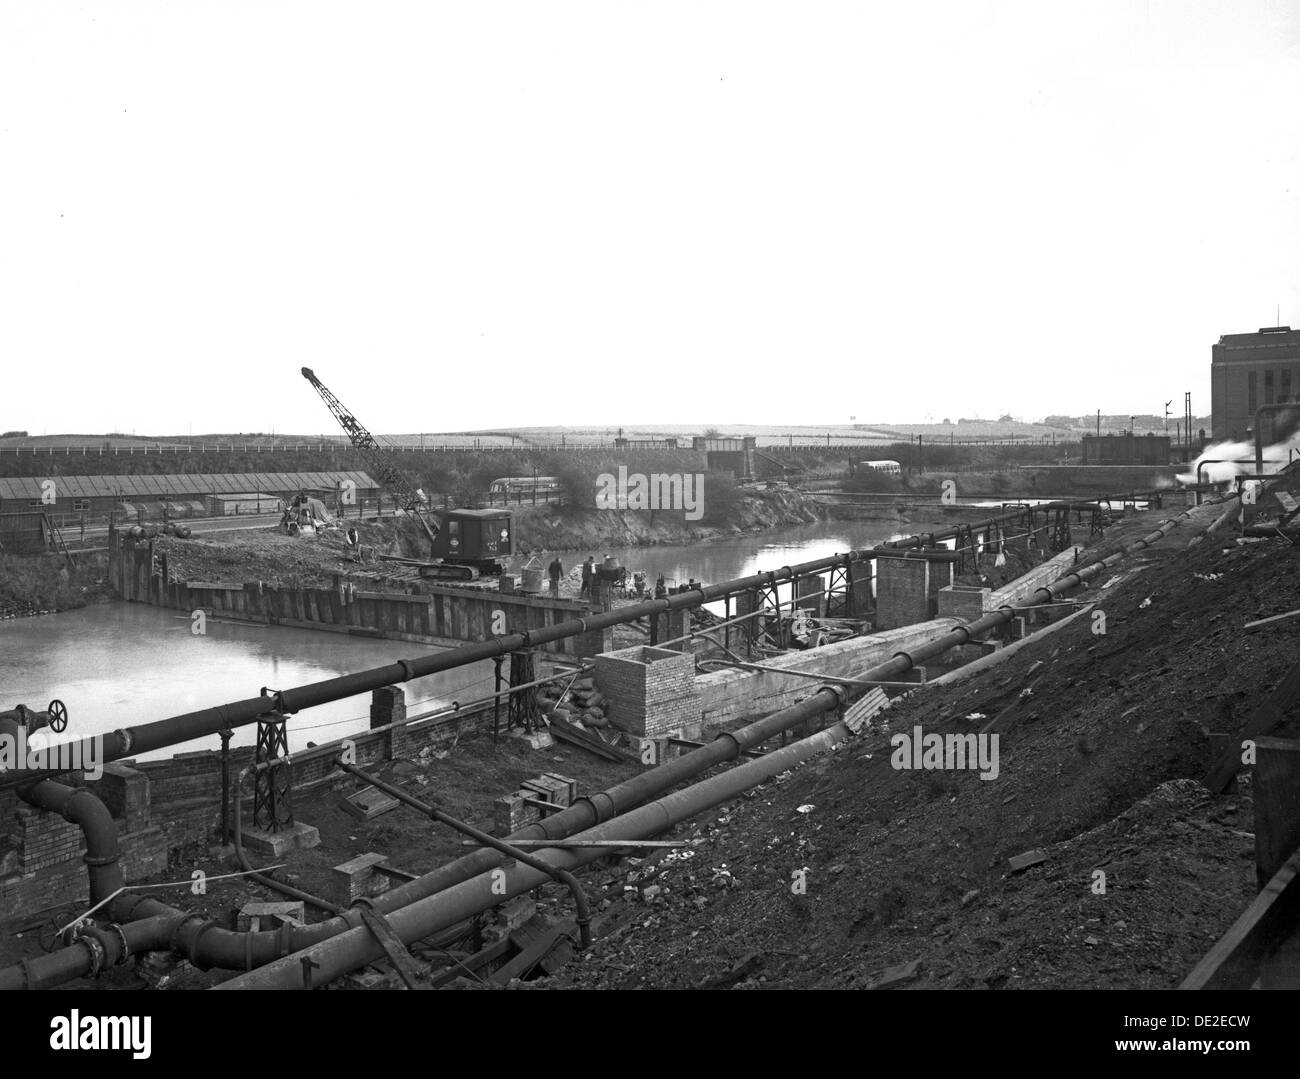 Construction of the reservoir, Manvers Main Colliery, Wath upon Dearne, South Yorkshire, 1955. Artist: Michael Walters Stock Photo